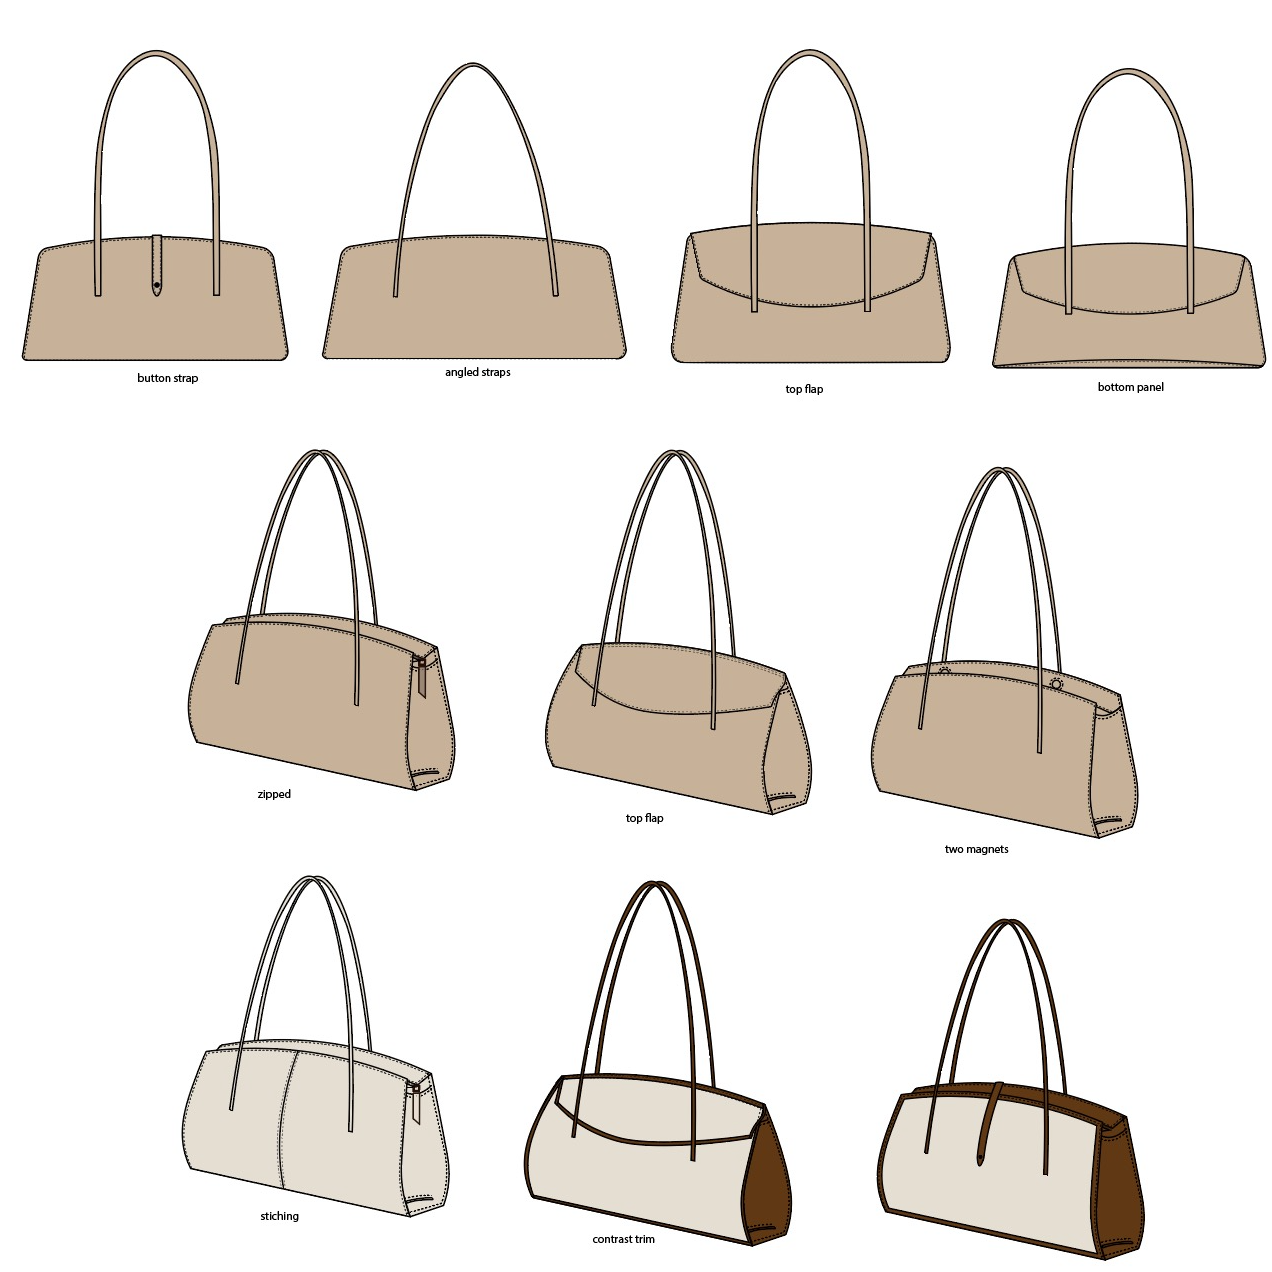 Learn how to easily create a marketing plan for handbags | BluCactus